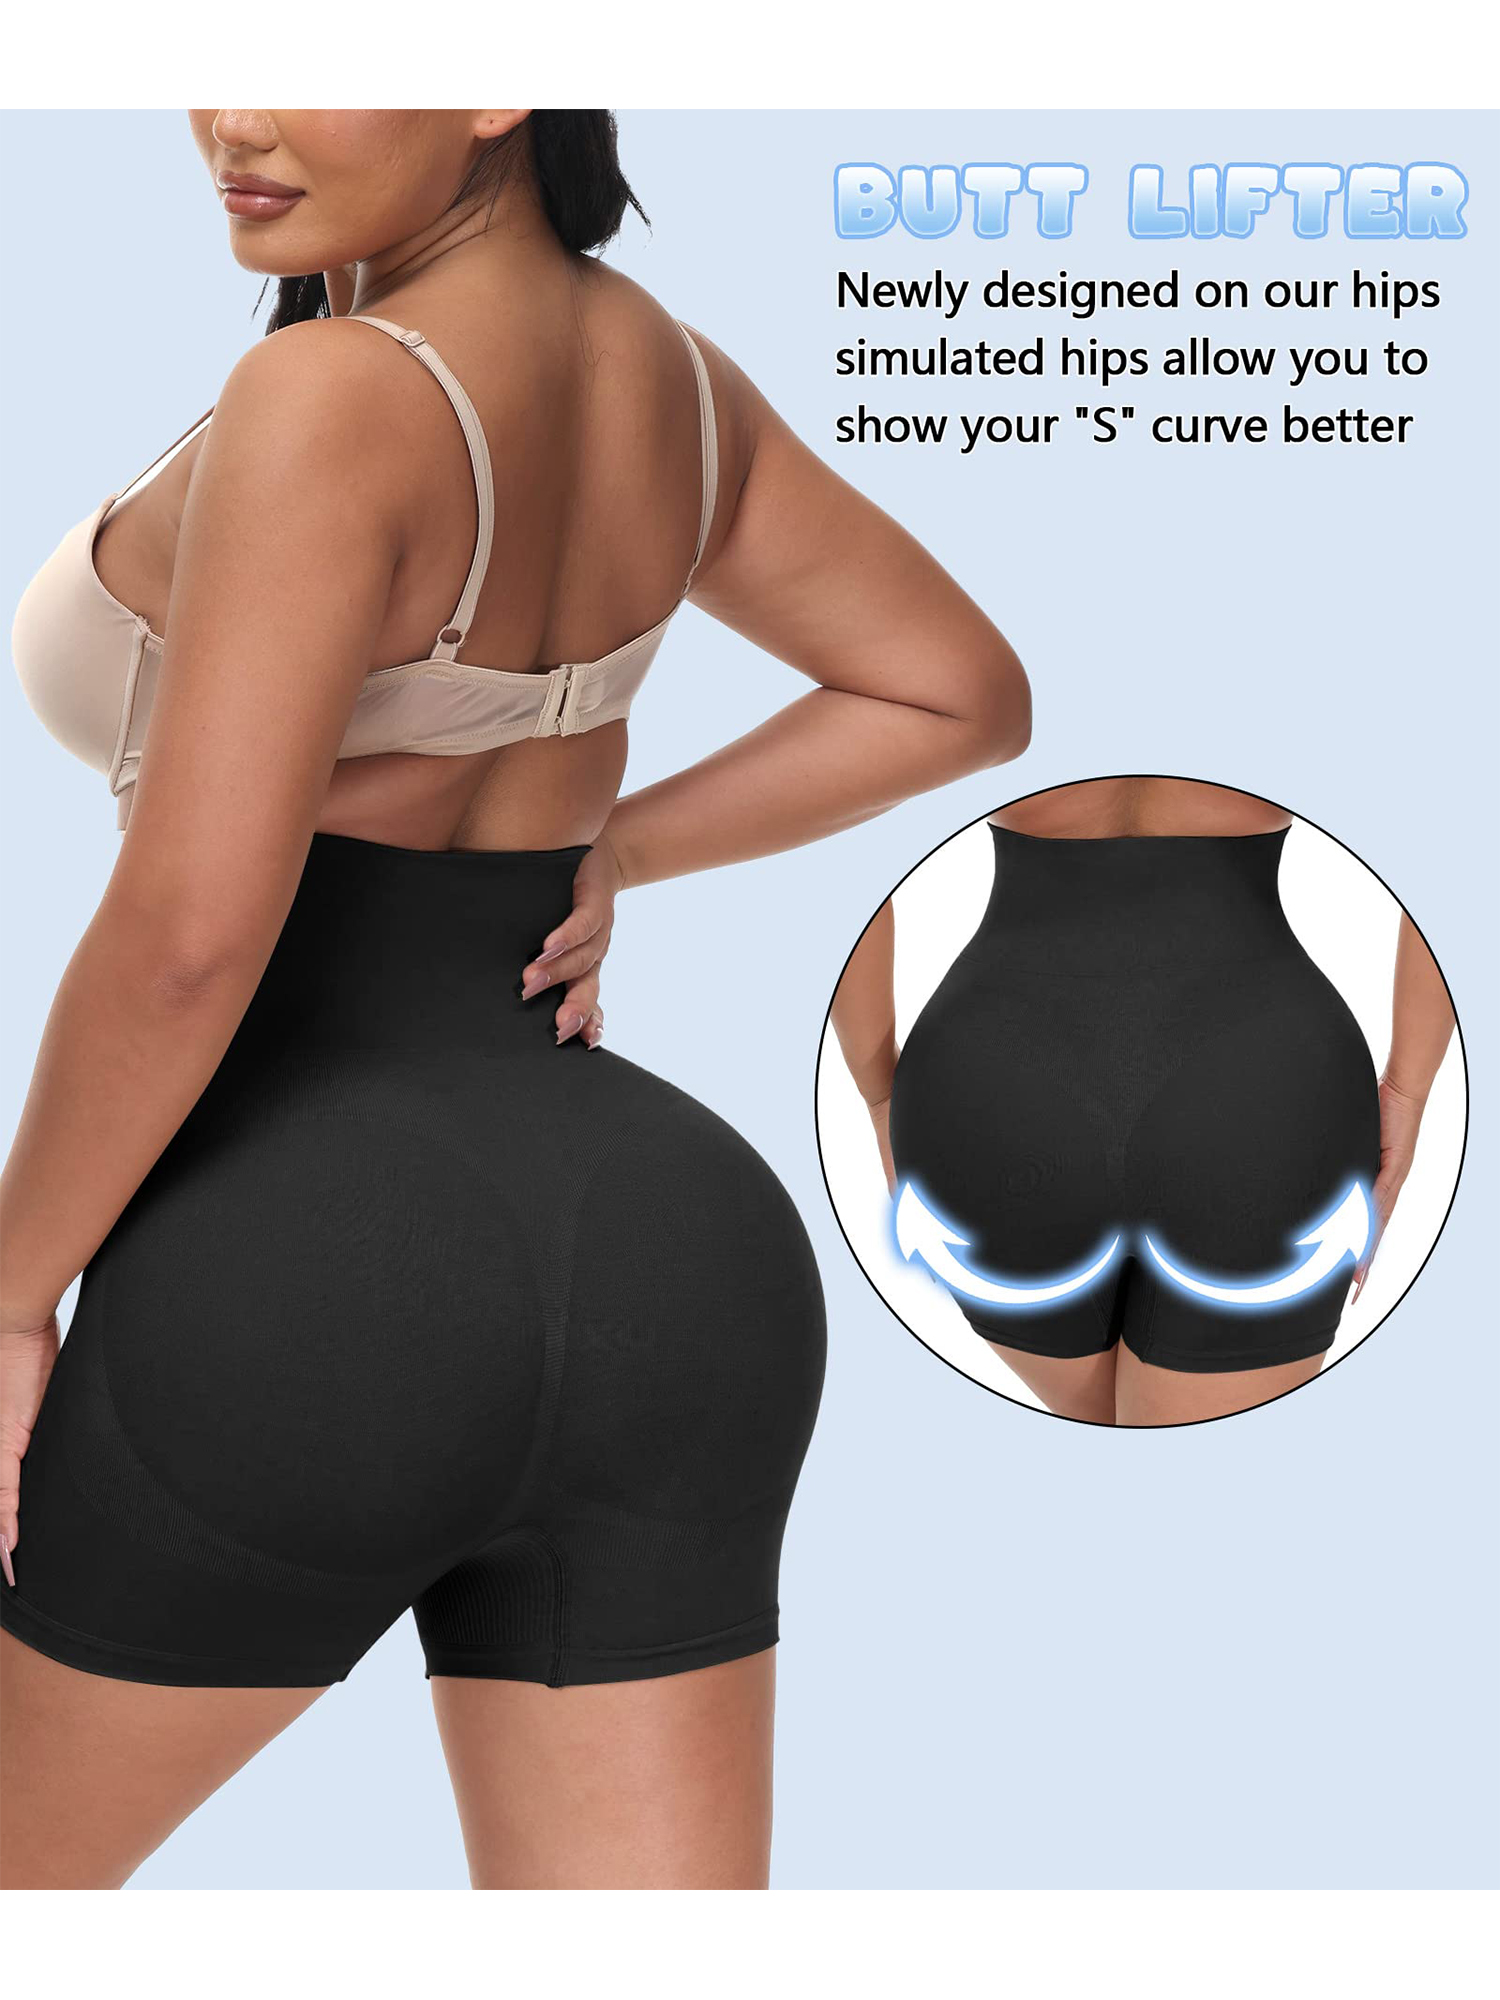 Booty Shorts - Highlight your Glutes